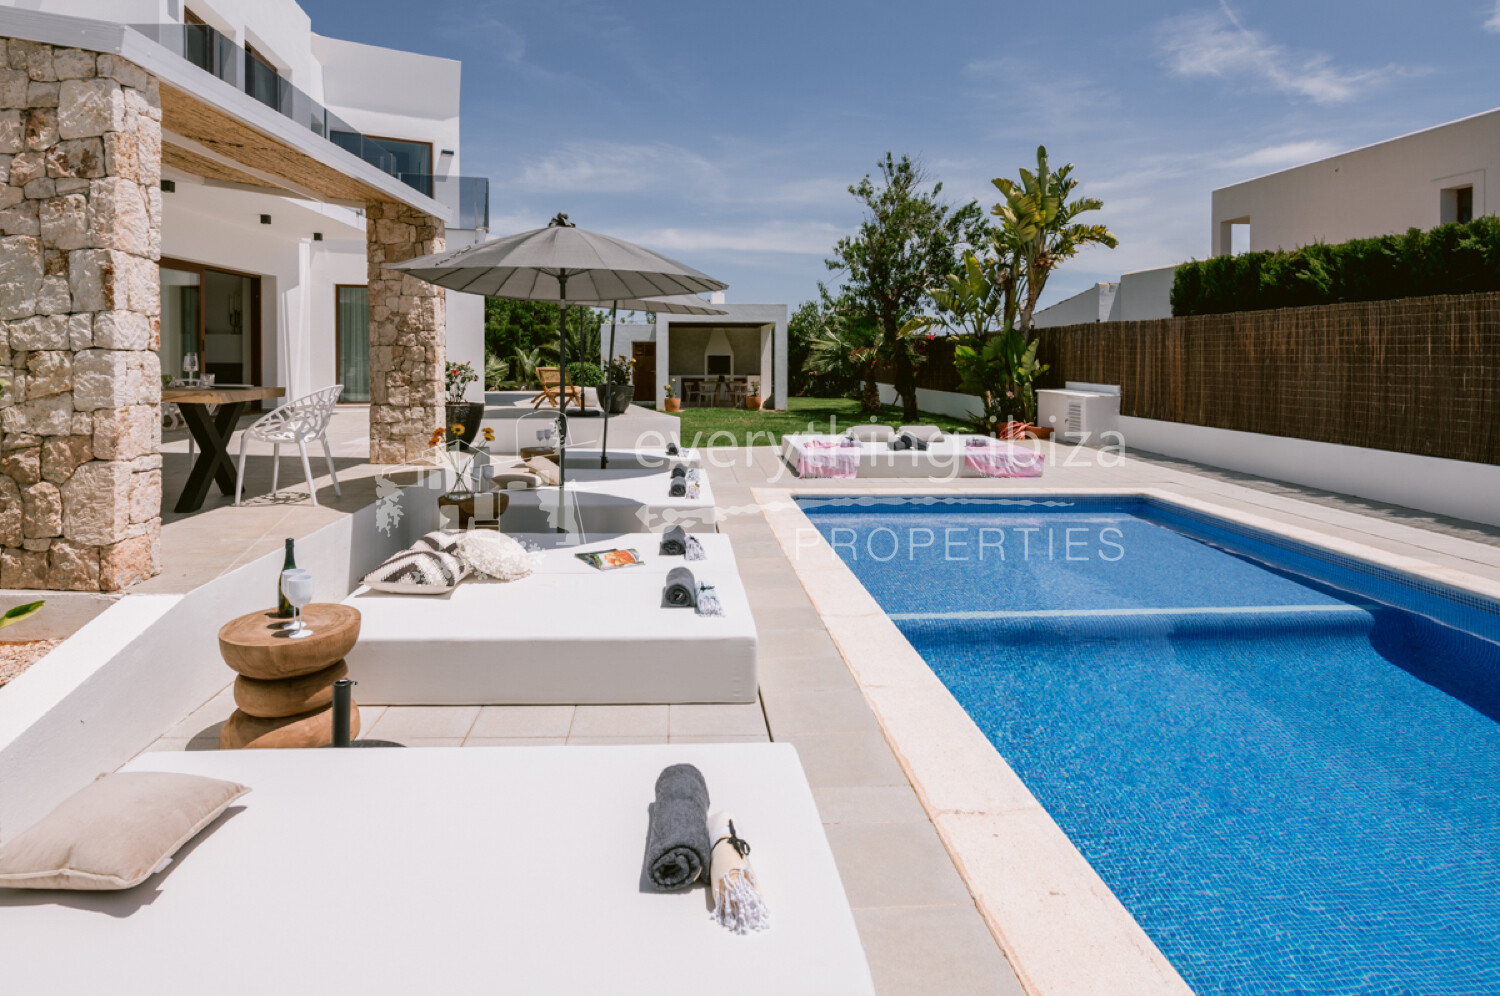 Modern Luxurious Detached Villa with Private Pool and Beautiful Garden, ref. 1720, for sale in Ibiza by everything ibiza Properties